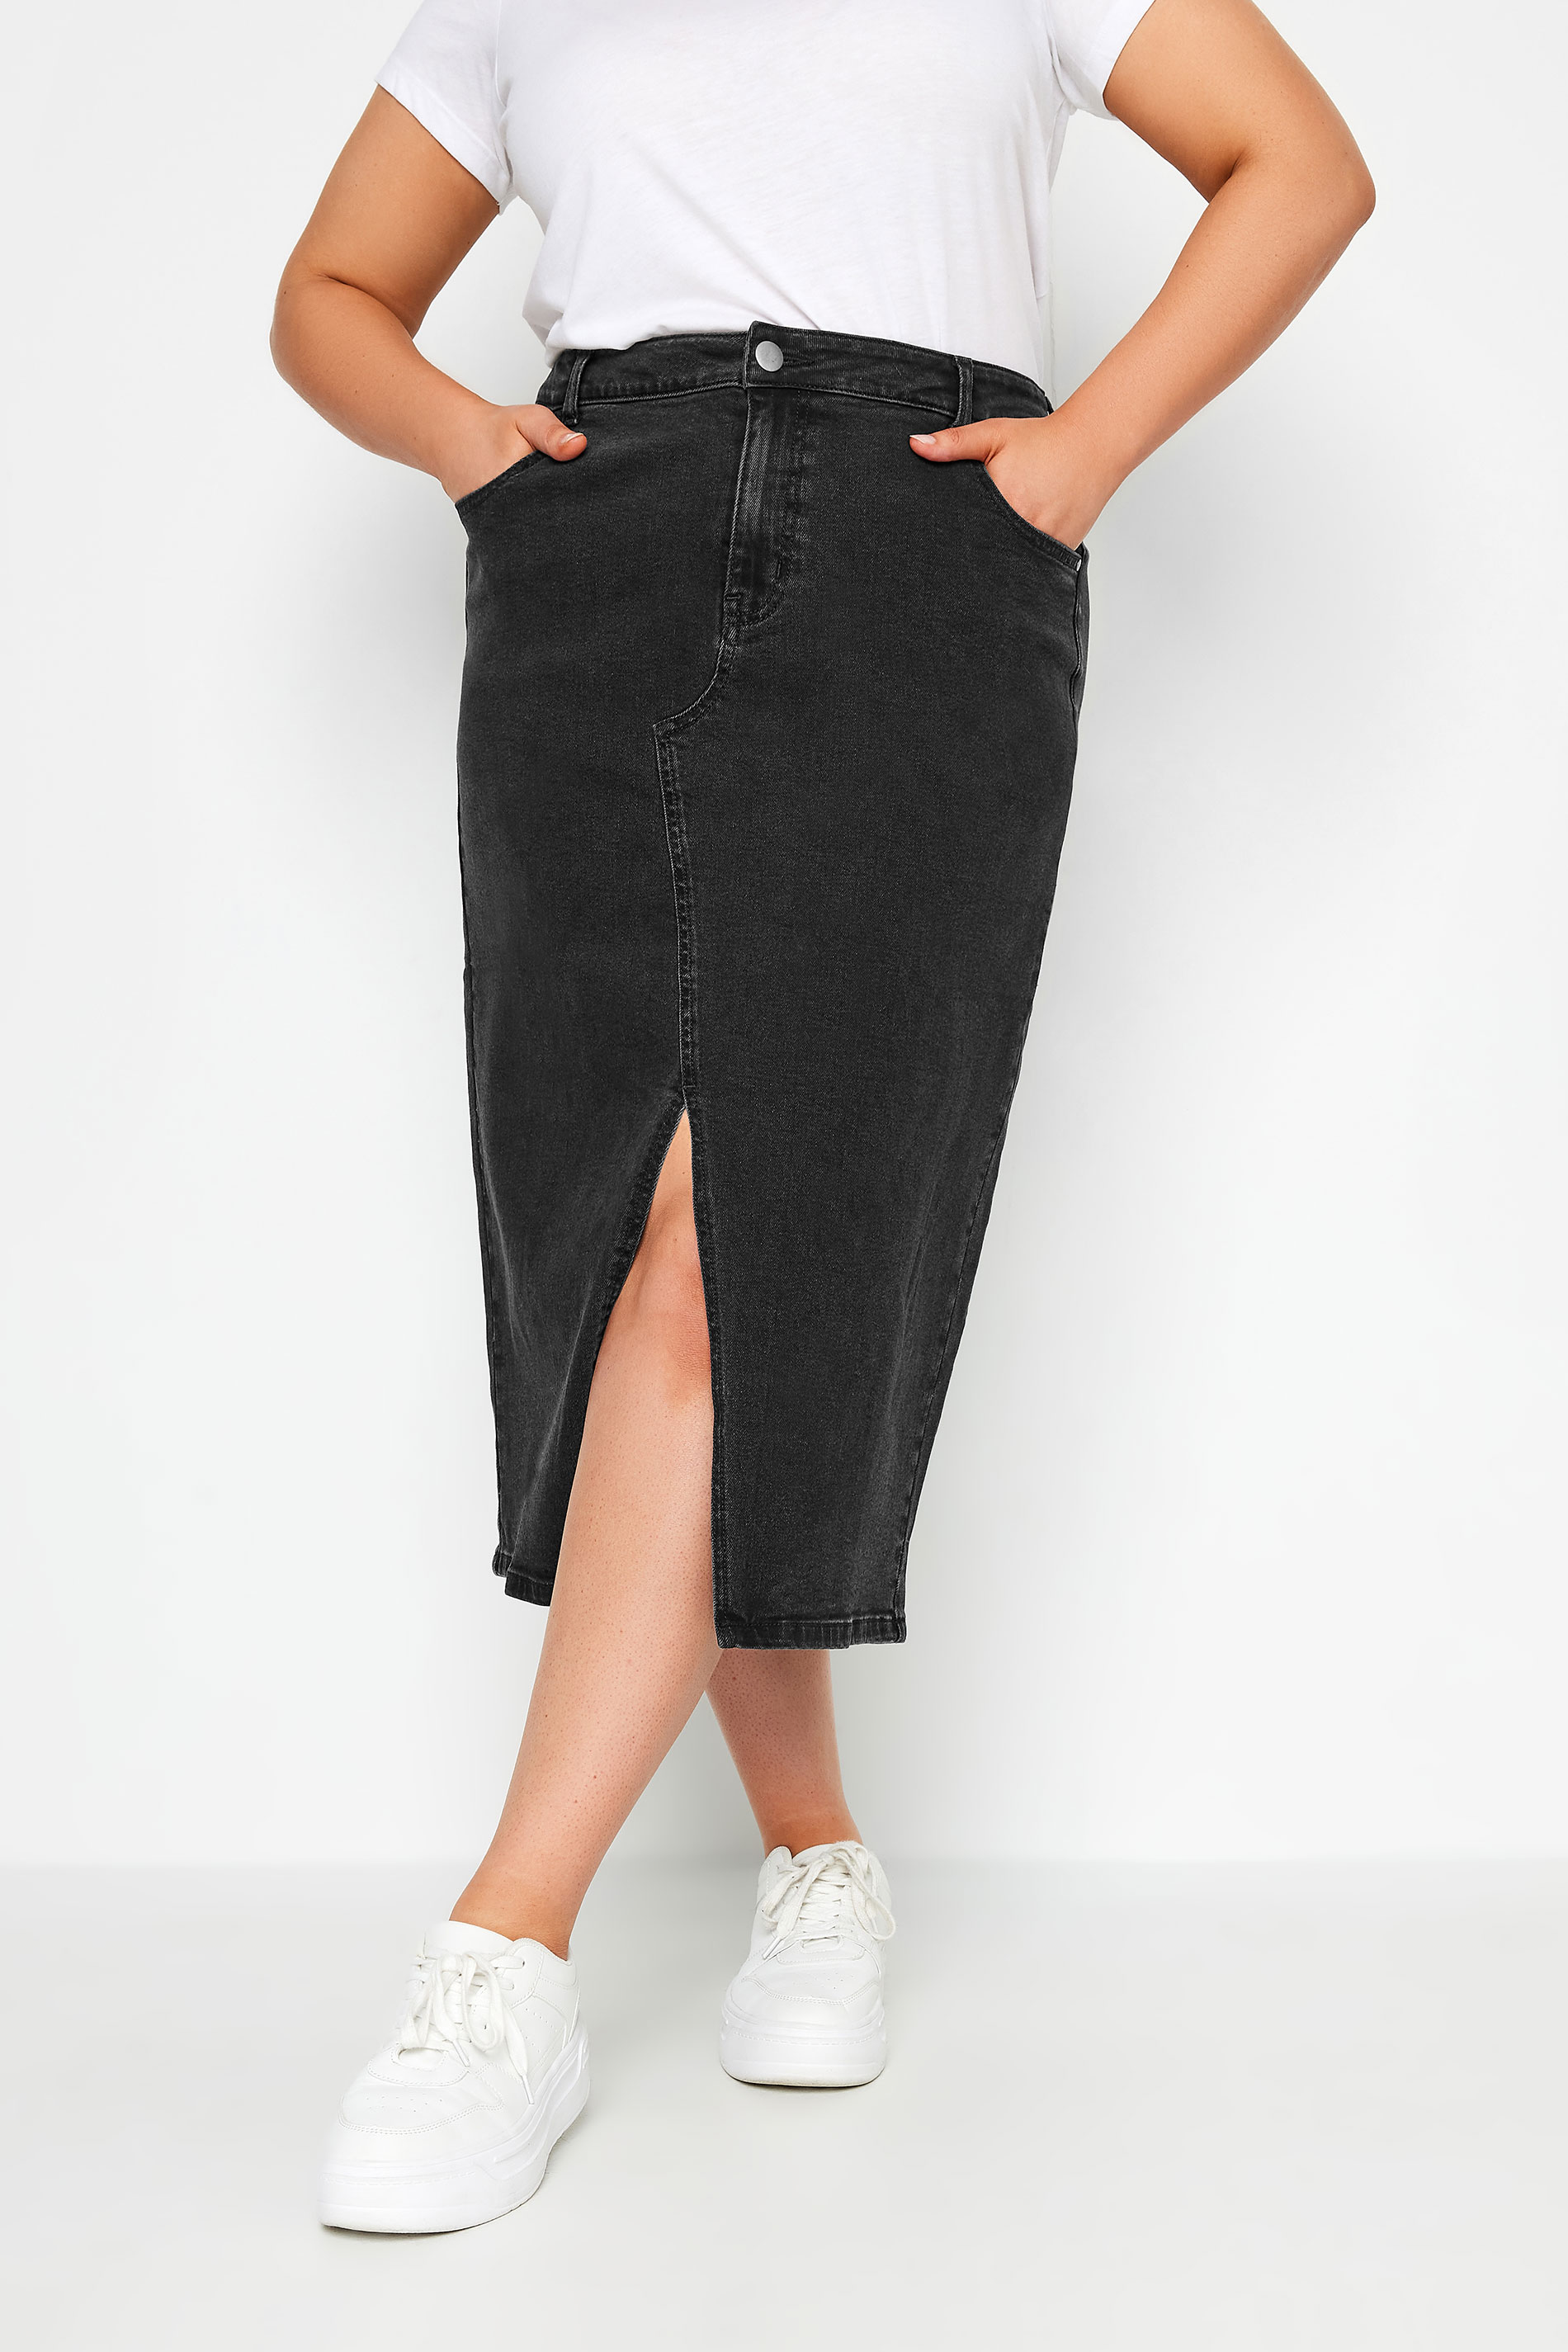 YOURS Plus Size Black Midi Stretch Denim Skirt | Yours Clothing 2